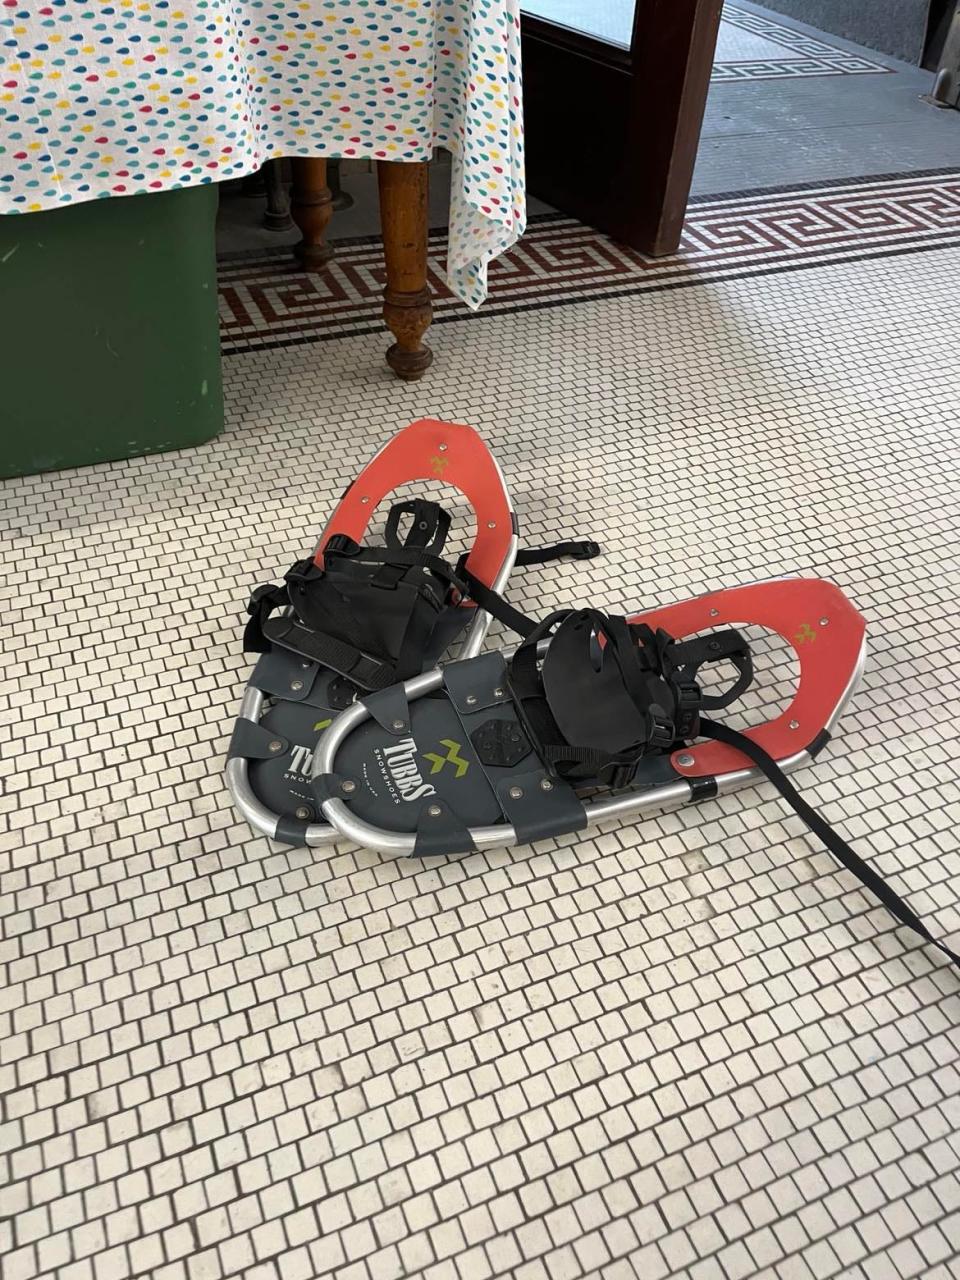 At Beals Memorial Library in Winchendon, library cardholders have the opportunity to borrow not just reading materials but all kinds of items from snowshoes to a Breadmaker. Right now, the library's snowshoes are available to be checked out for three weeks.